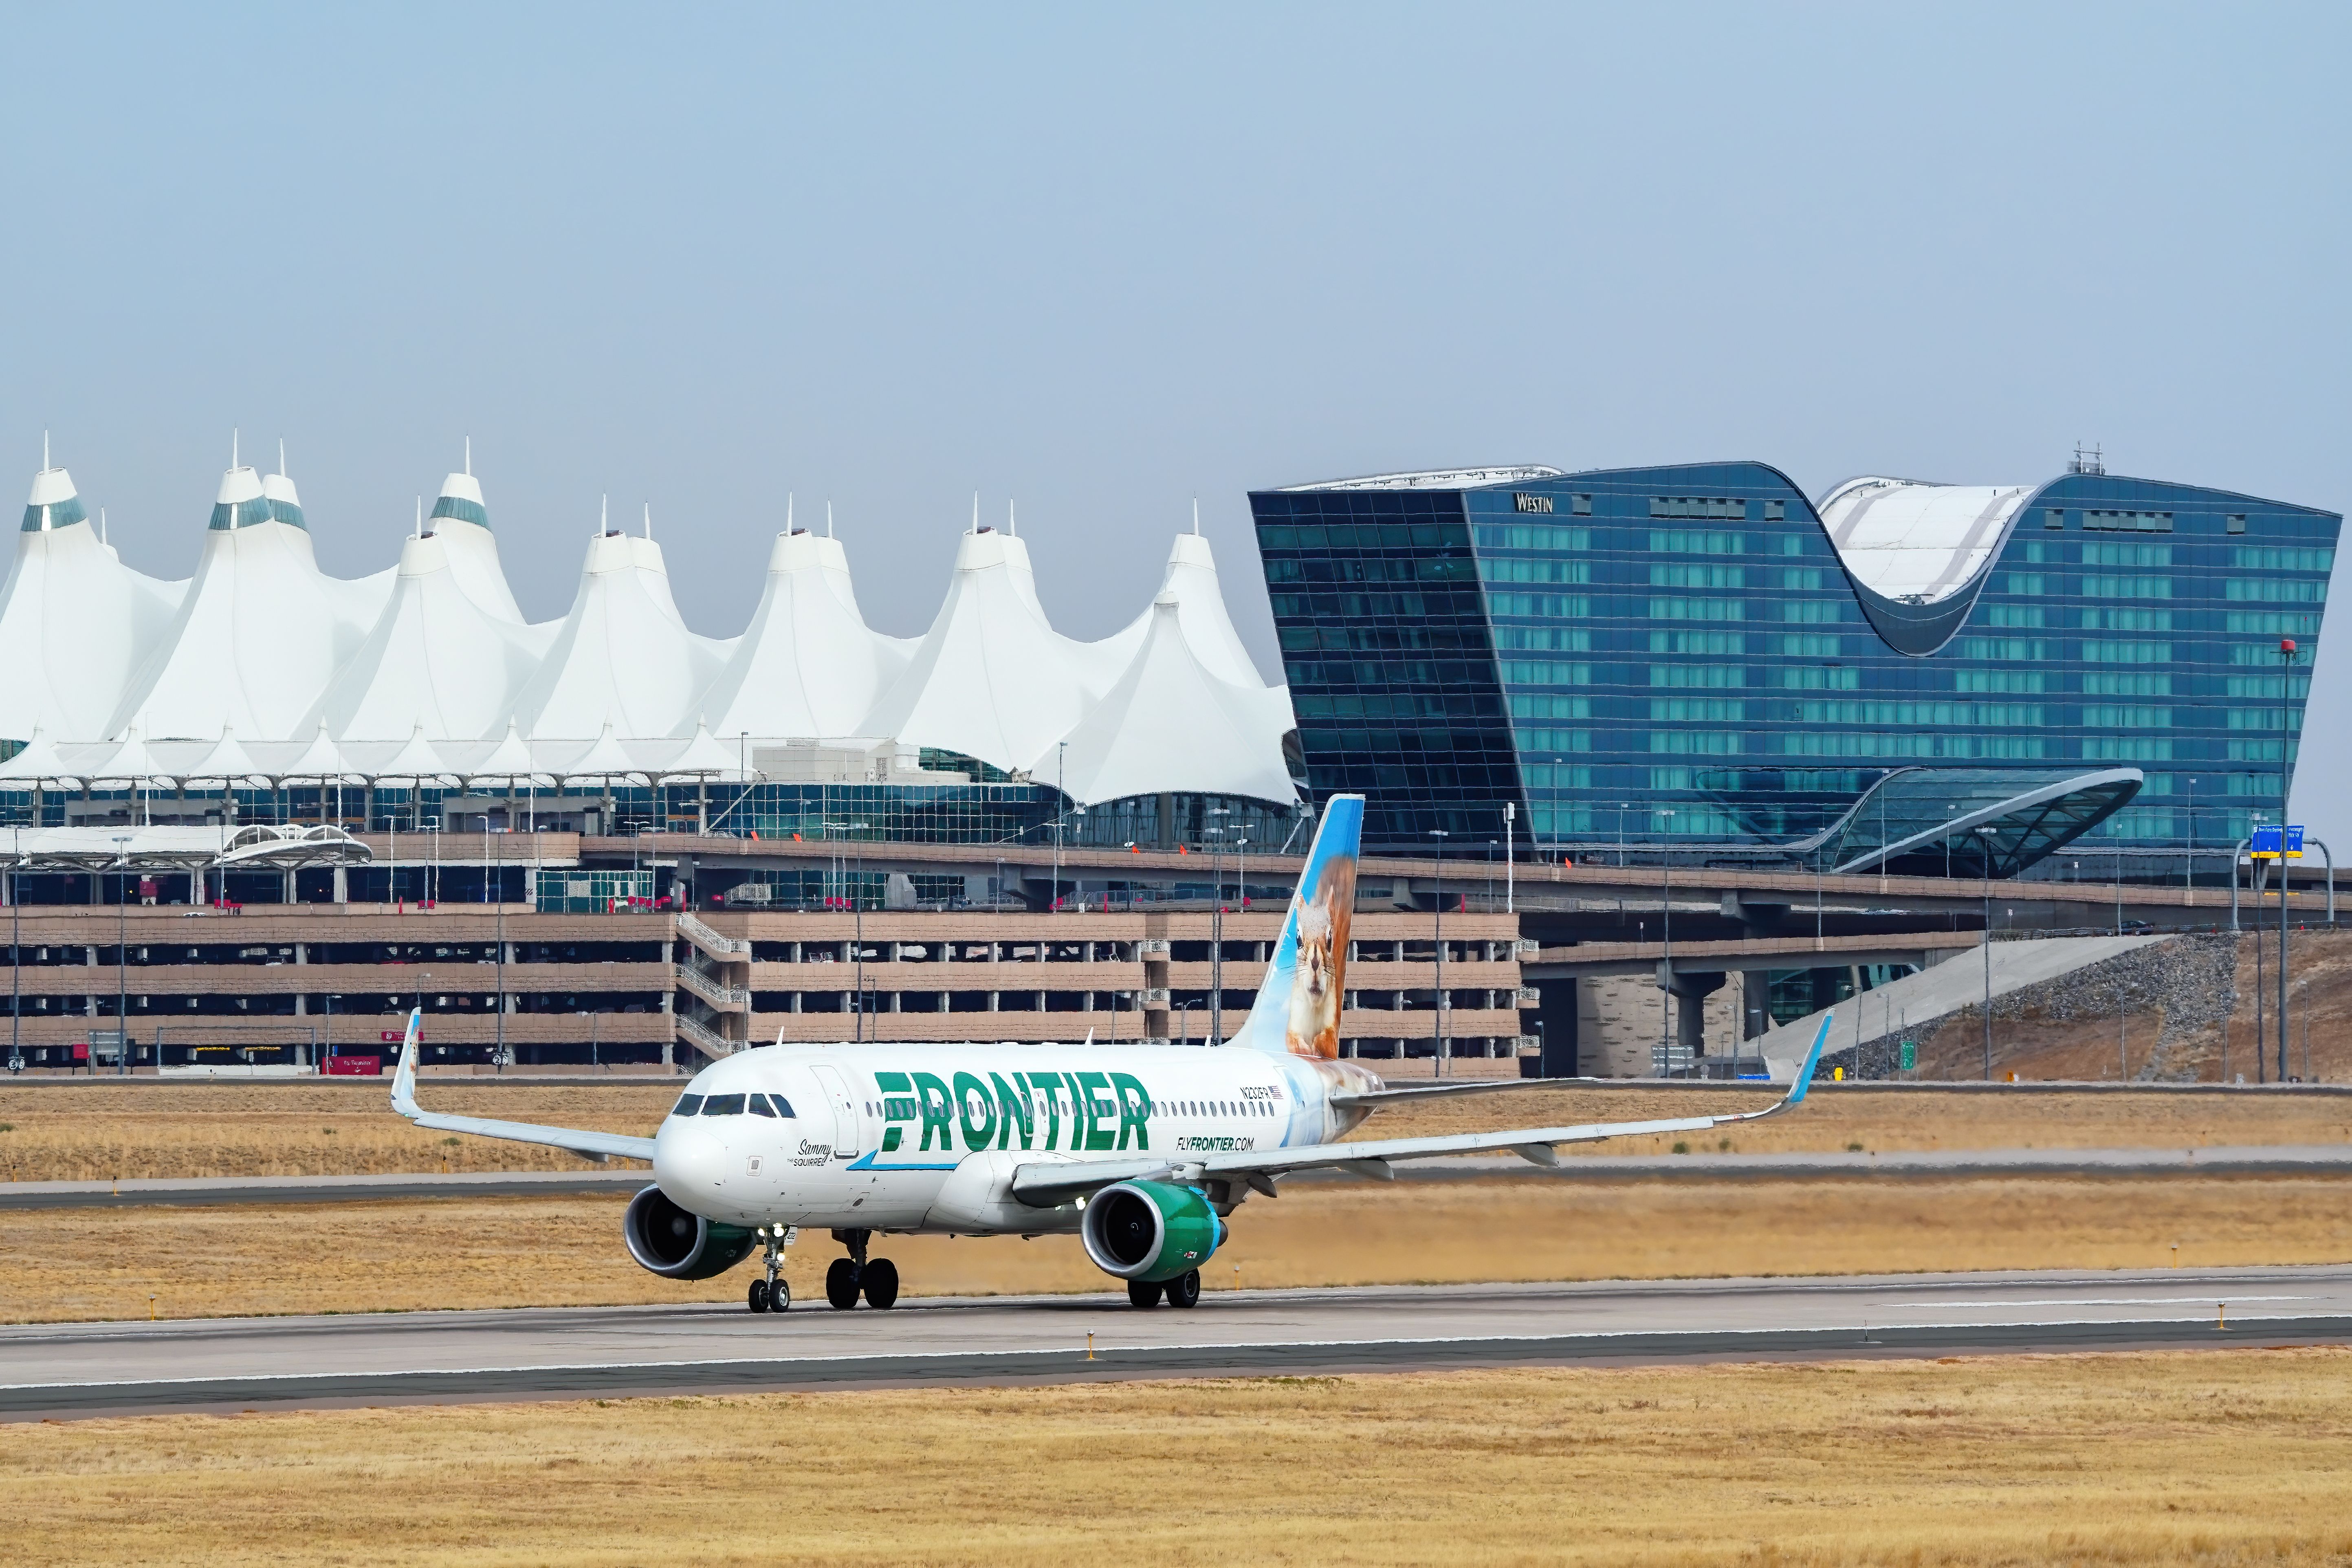 A Frontier Airbus A320 at Denver Int'l Airport.